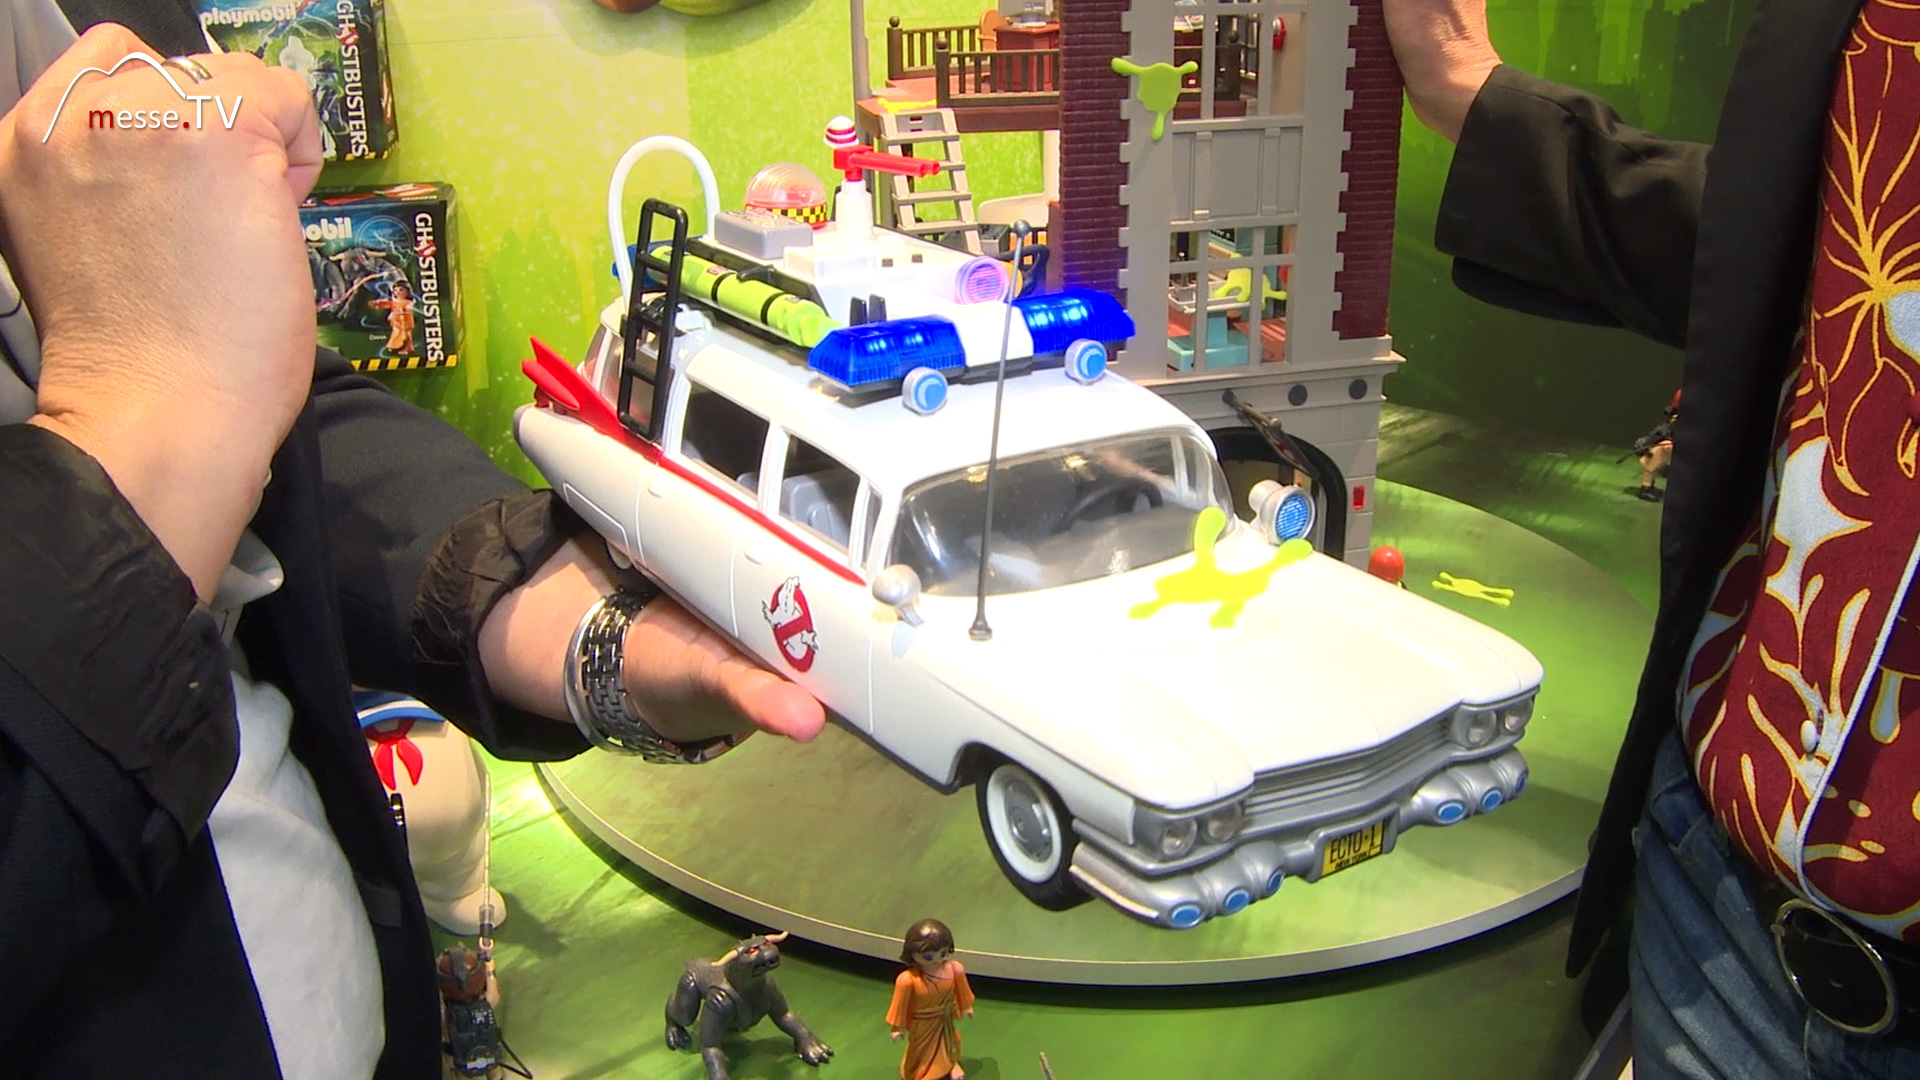 Ghostbusters Ecto Playmobil vehicle